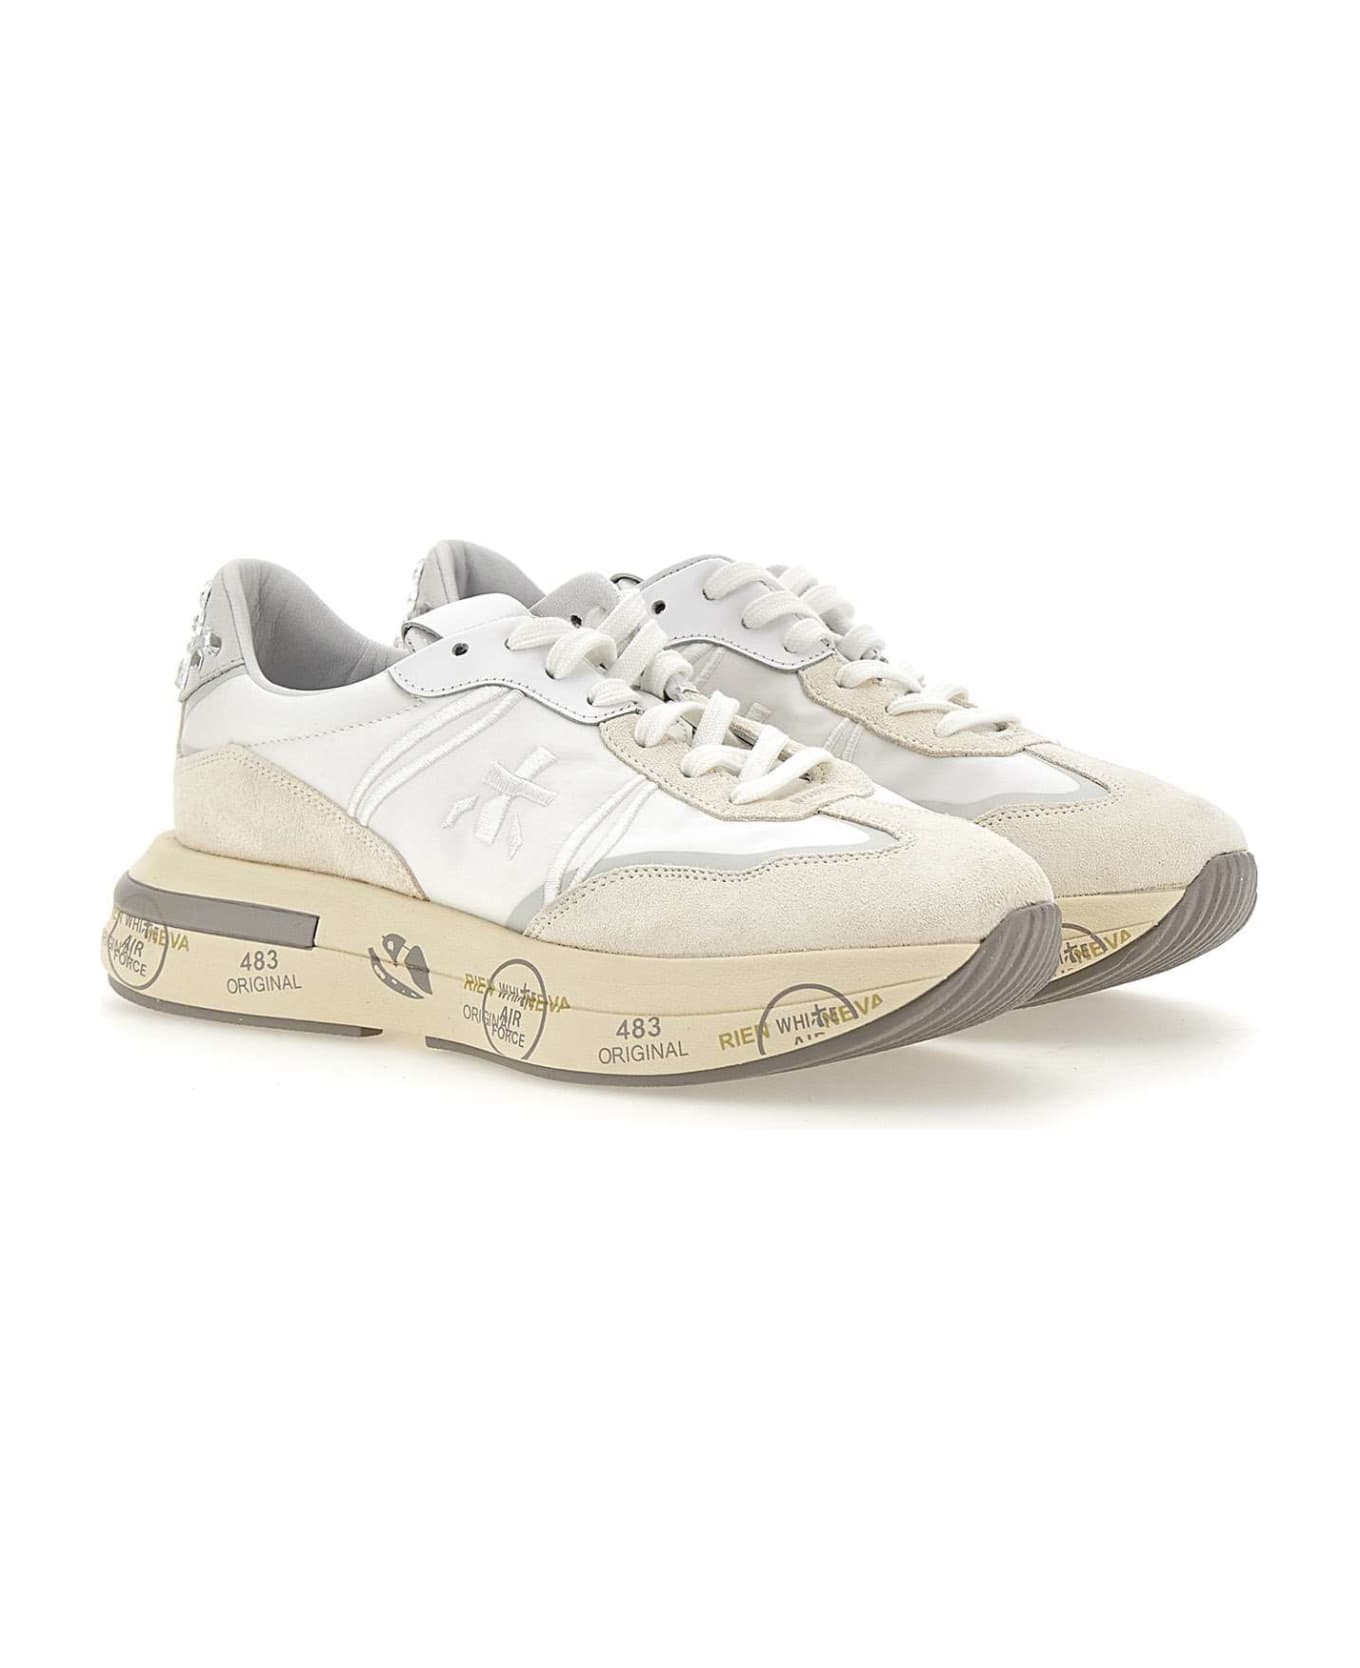 Premiata "cassie 6717" Leather And Fabric Sneakers - WHITE